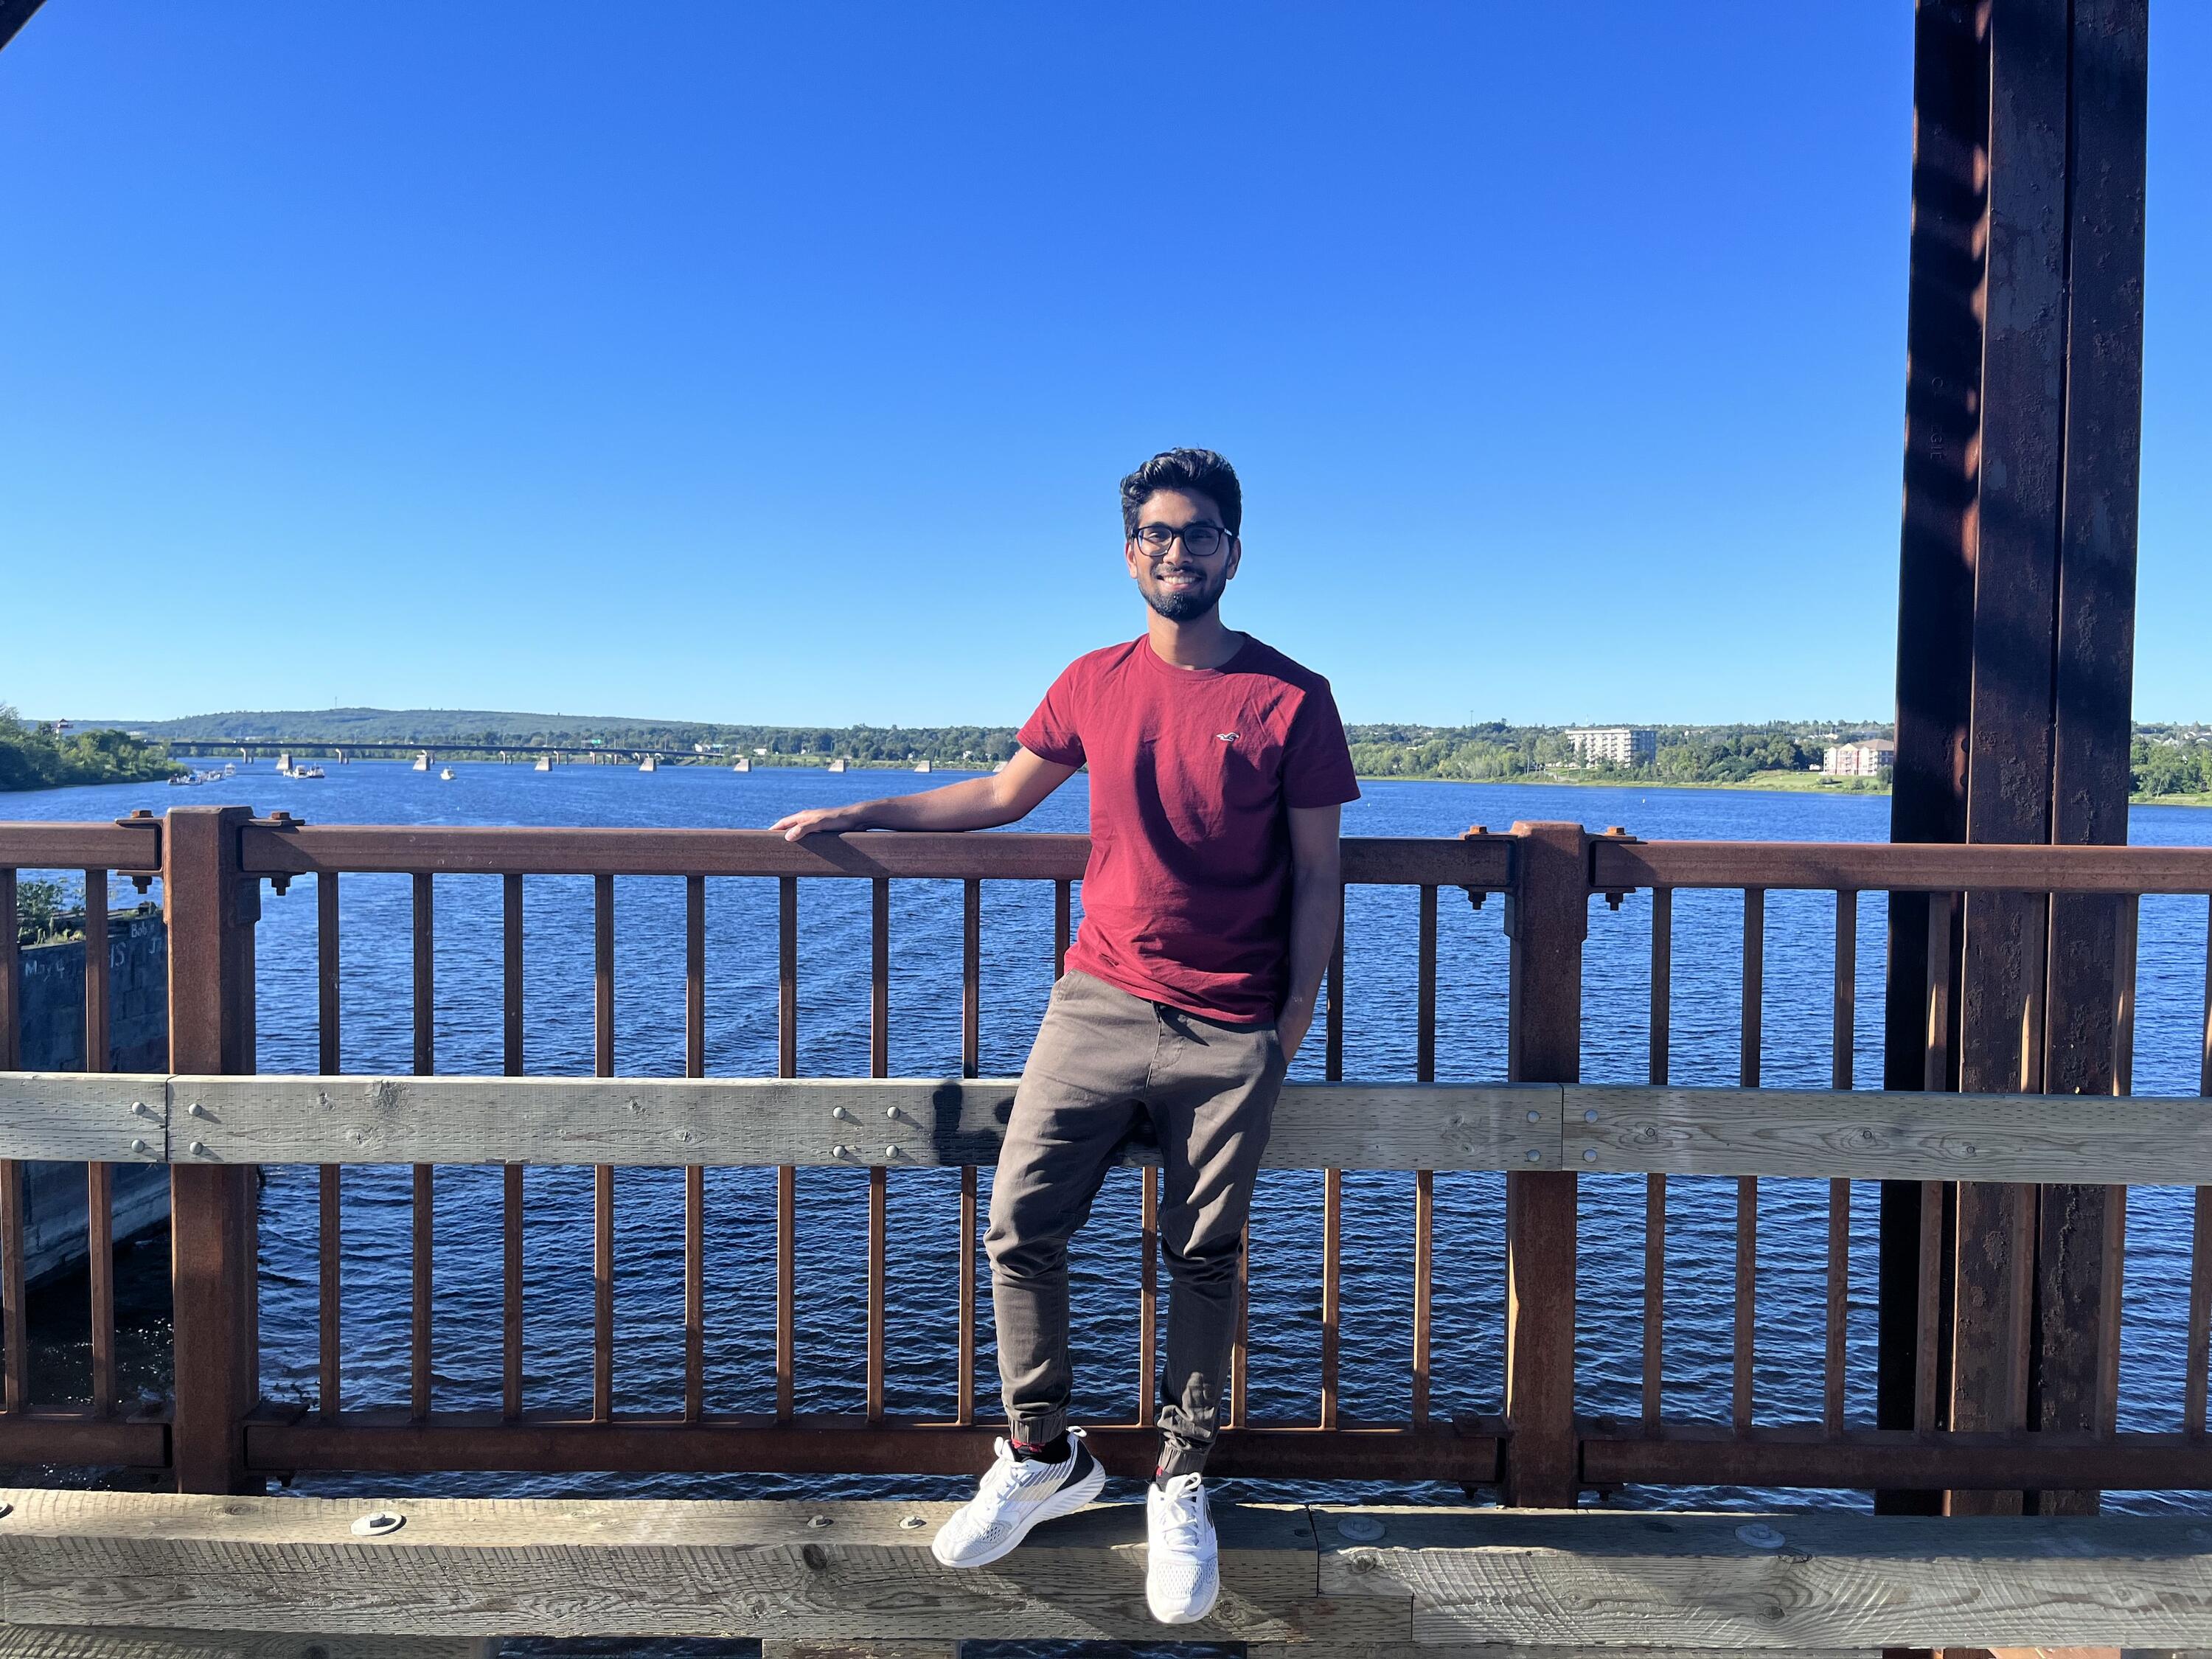 Saurav standing in front of a water body 